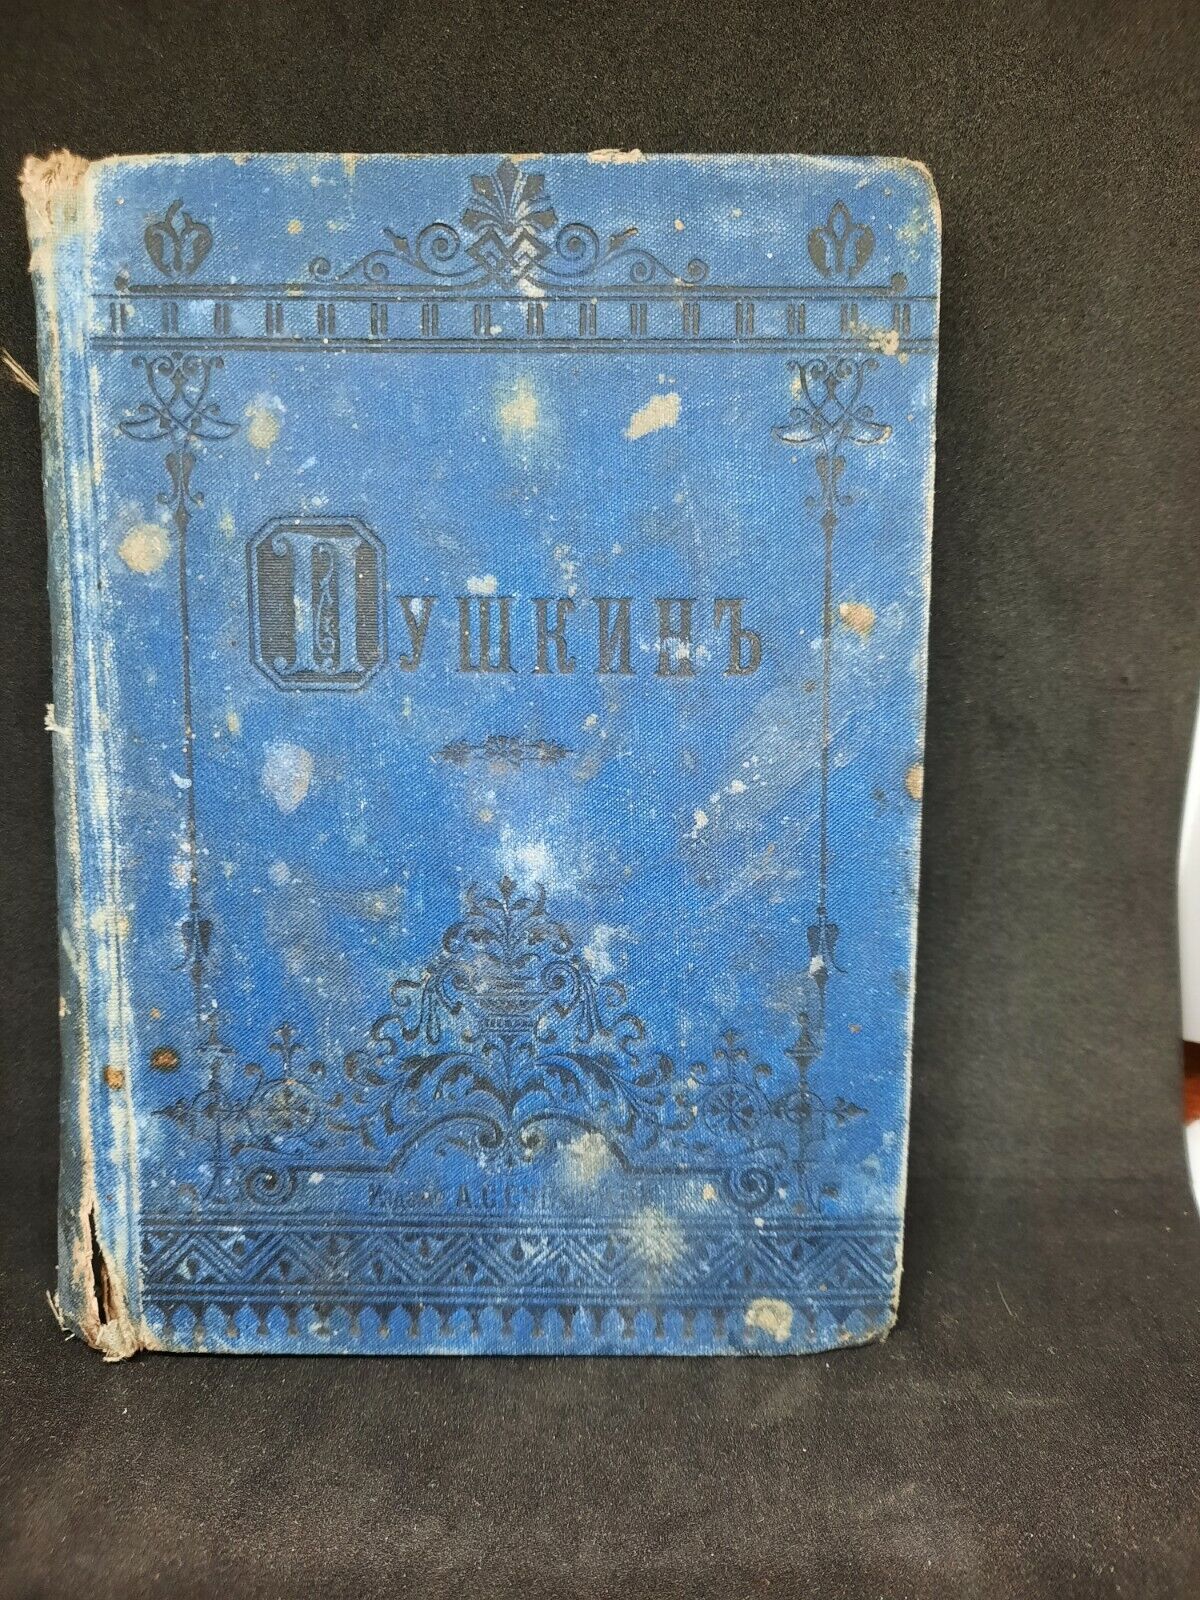 Vintage, Old, Rare, Antiques, The Book of Works by Pushkin 1887, Russian Empire Без бренда